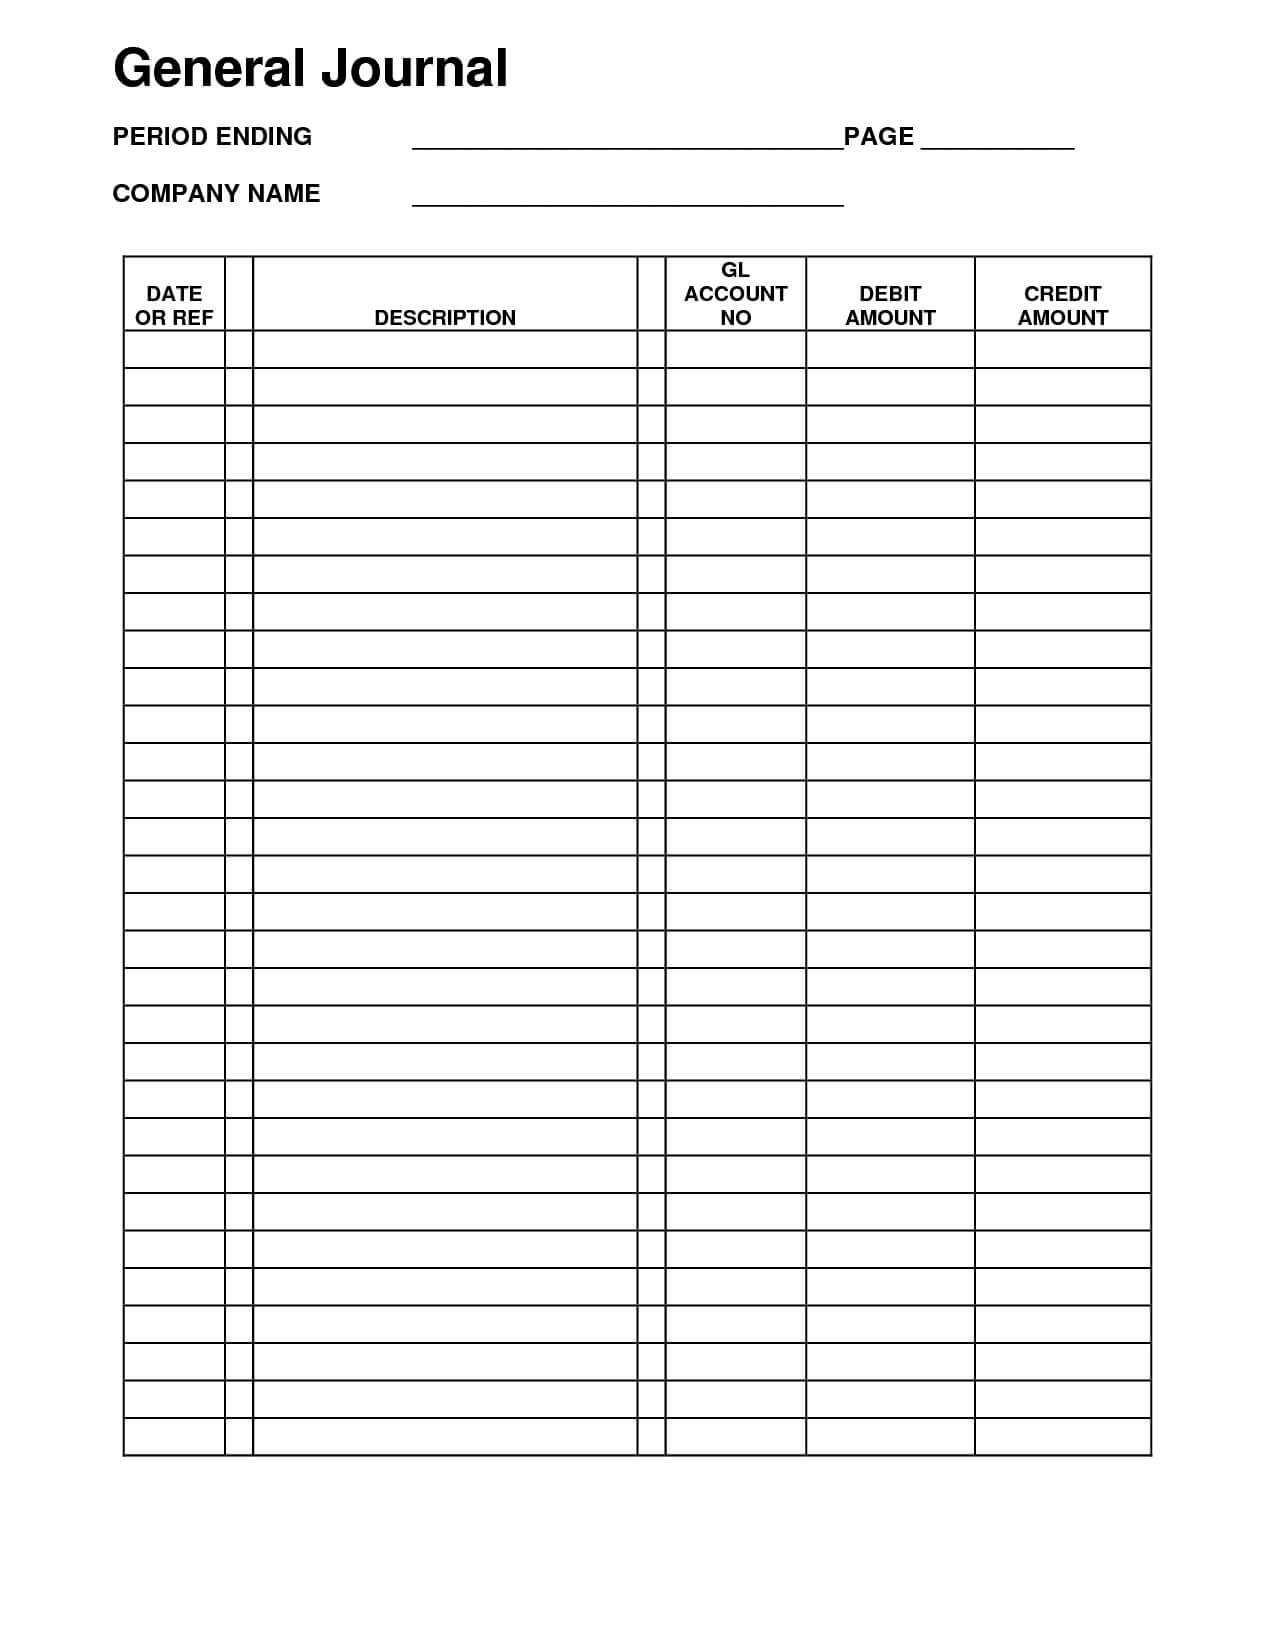 005 Template Ideas Journal Entry Fascinating Excel General Pertaining To Double Entry Journal Template For Word